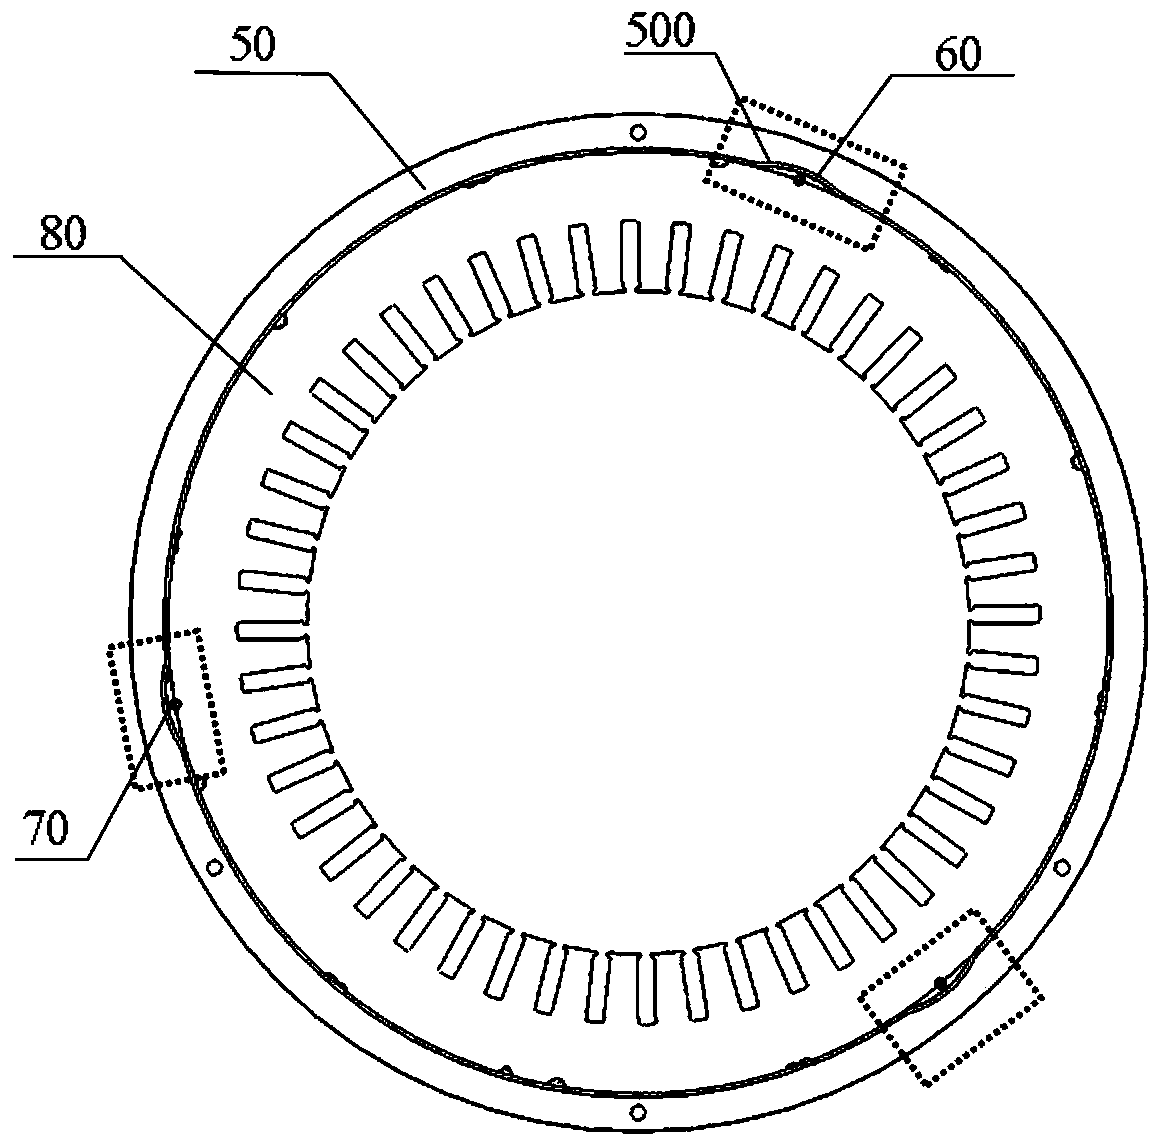 Motor and motor stator cooling structure